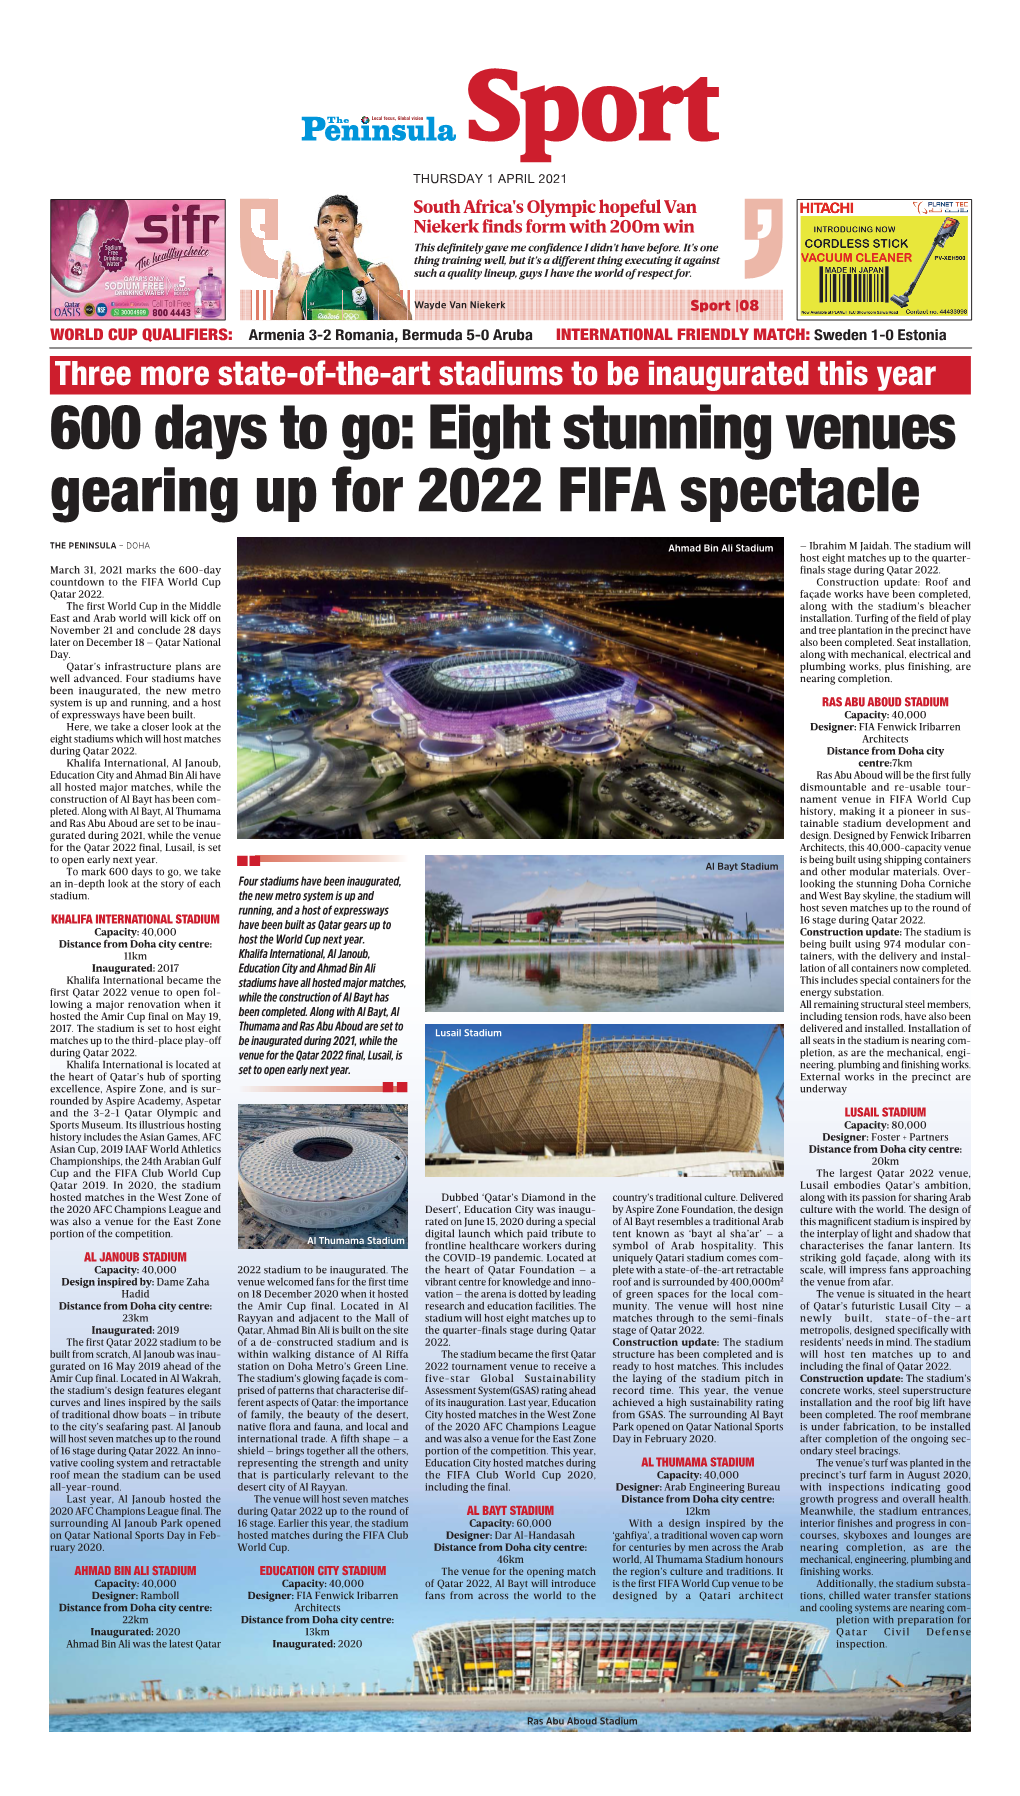 Eight Stunning Venues Gearing up for 2022 FIFA Spectacle